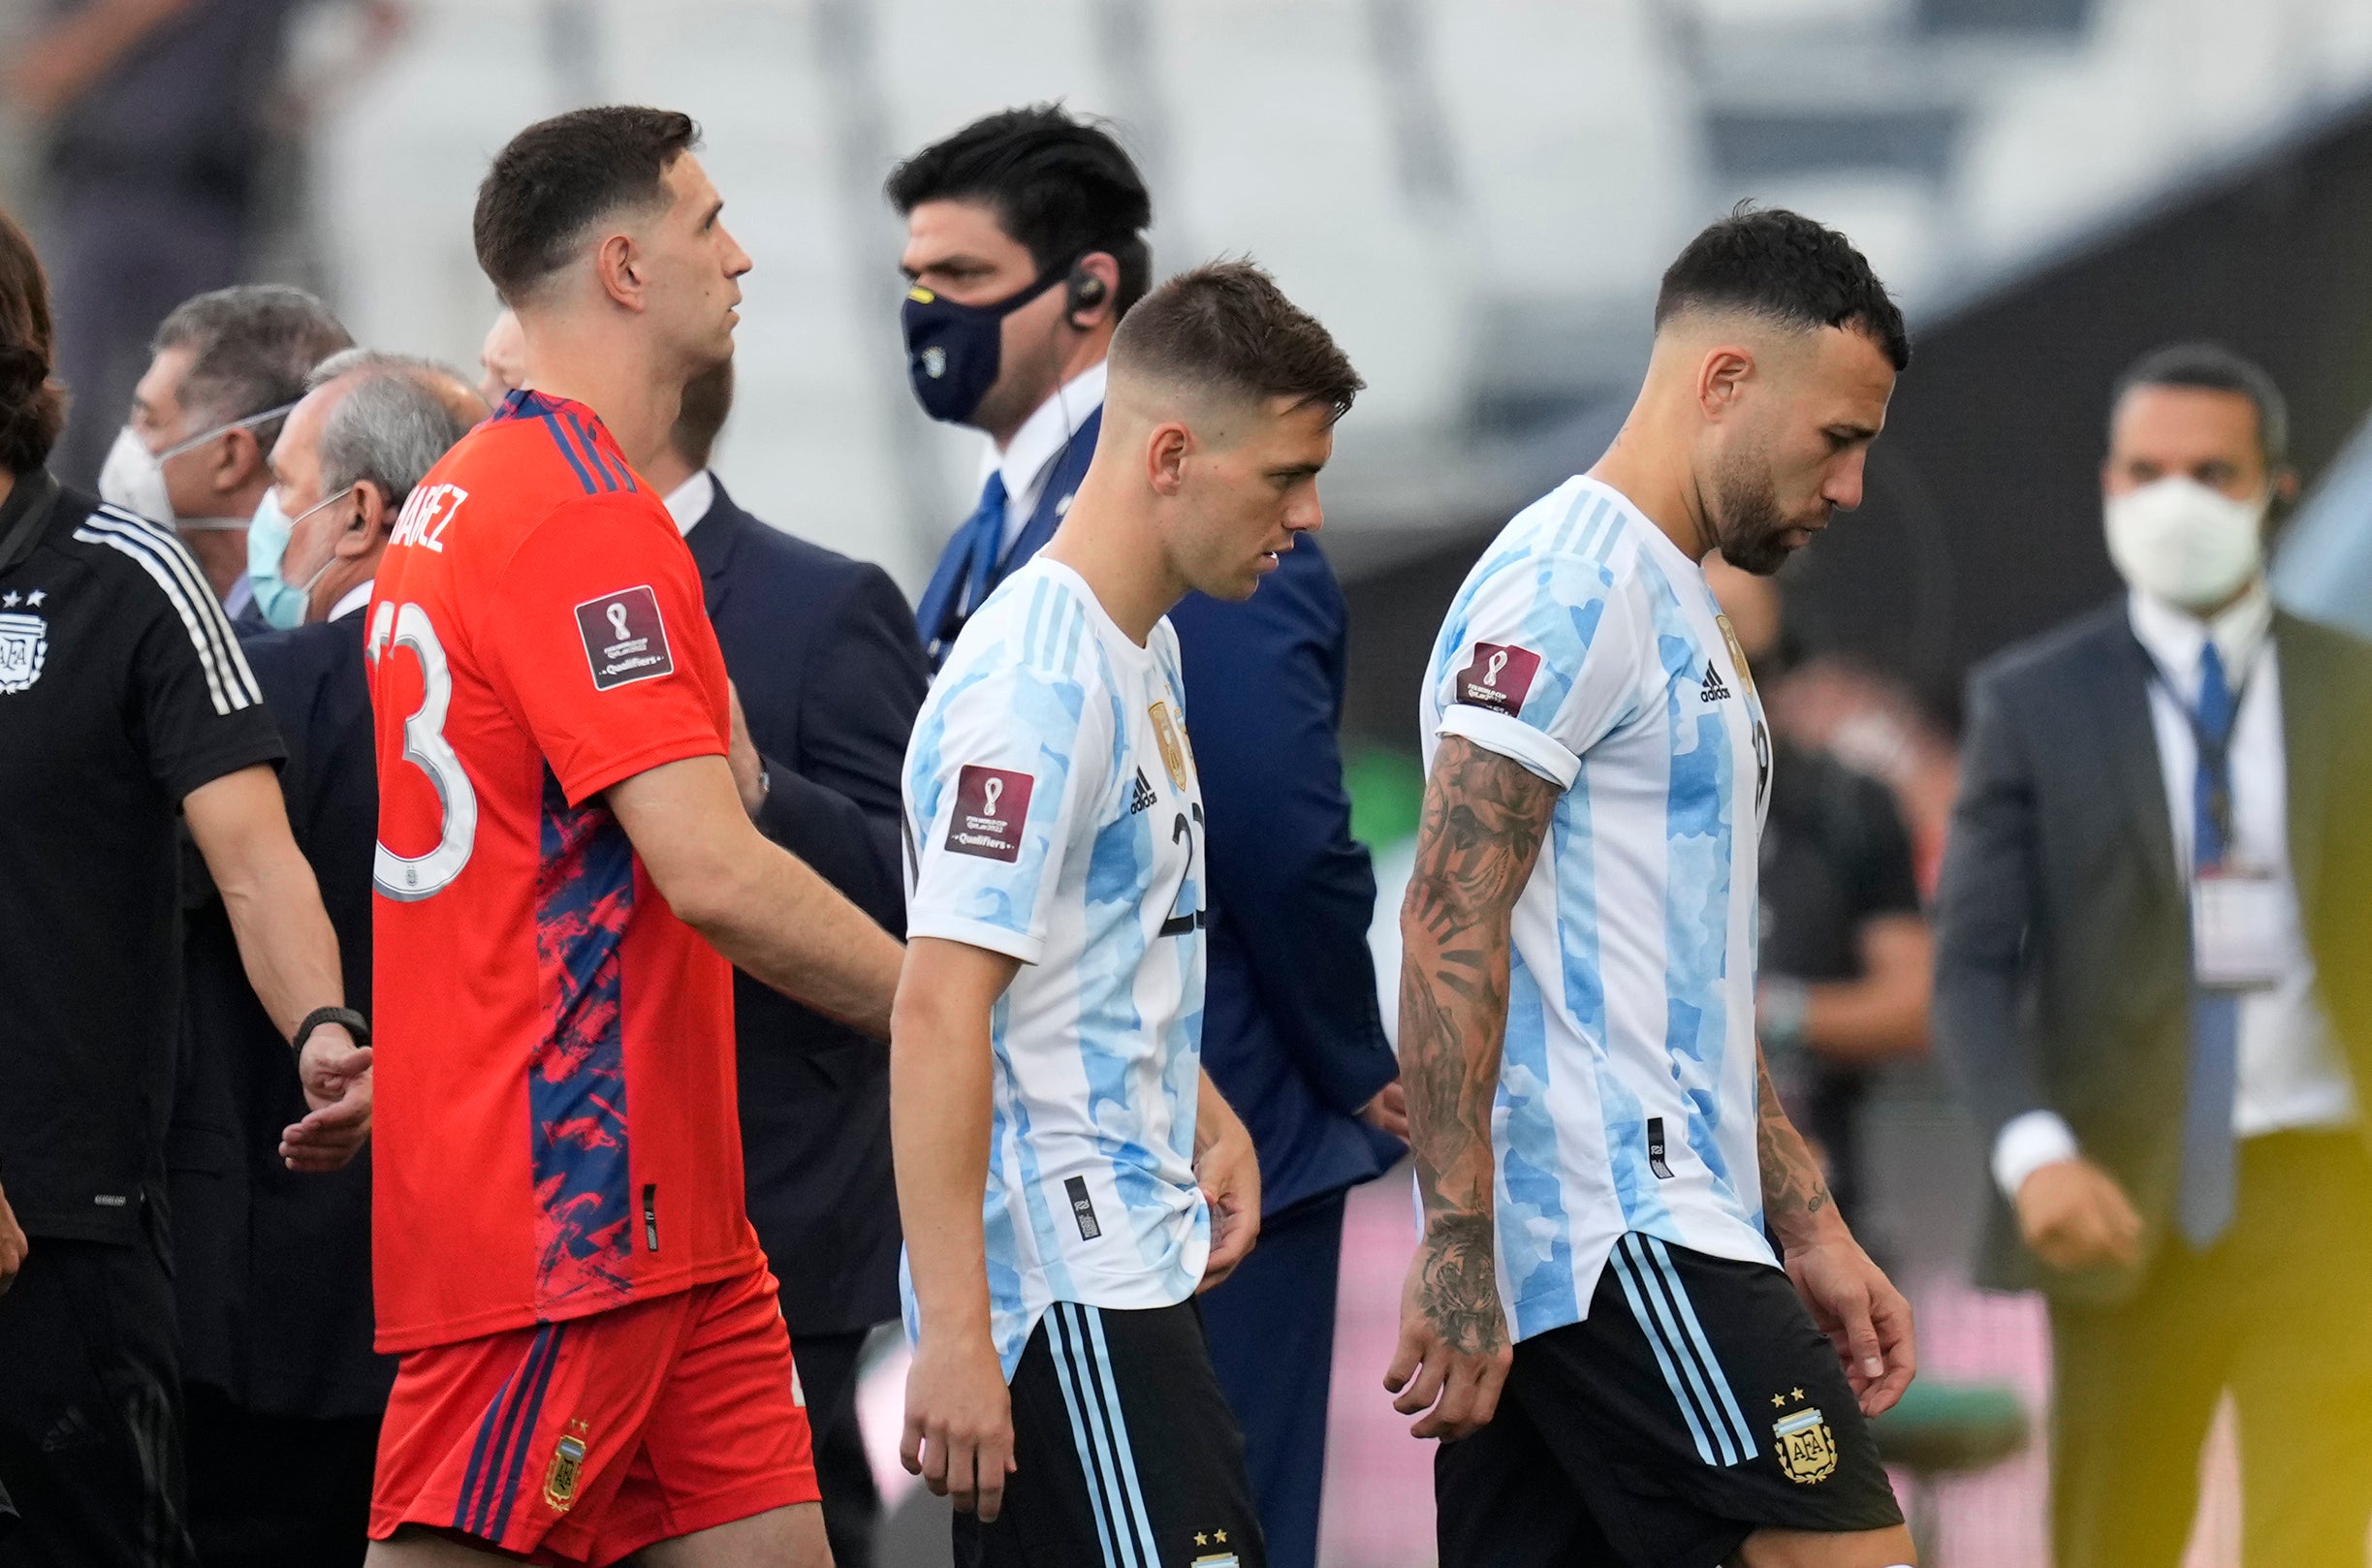 Brazil vs Argentina was suspended on Sunday